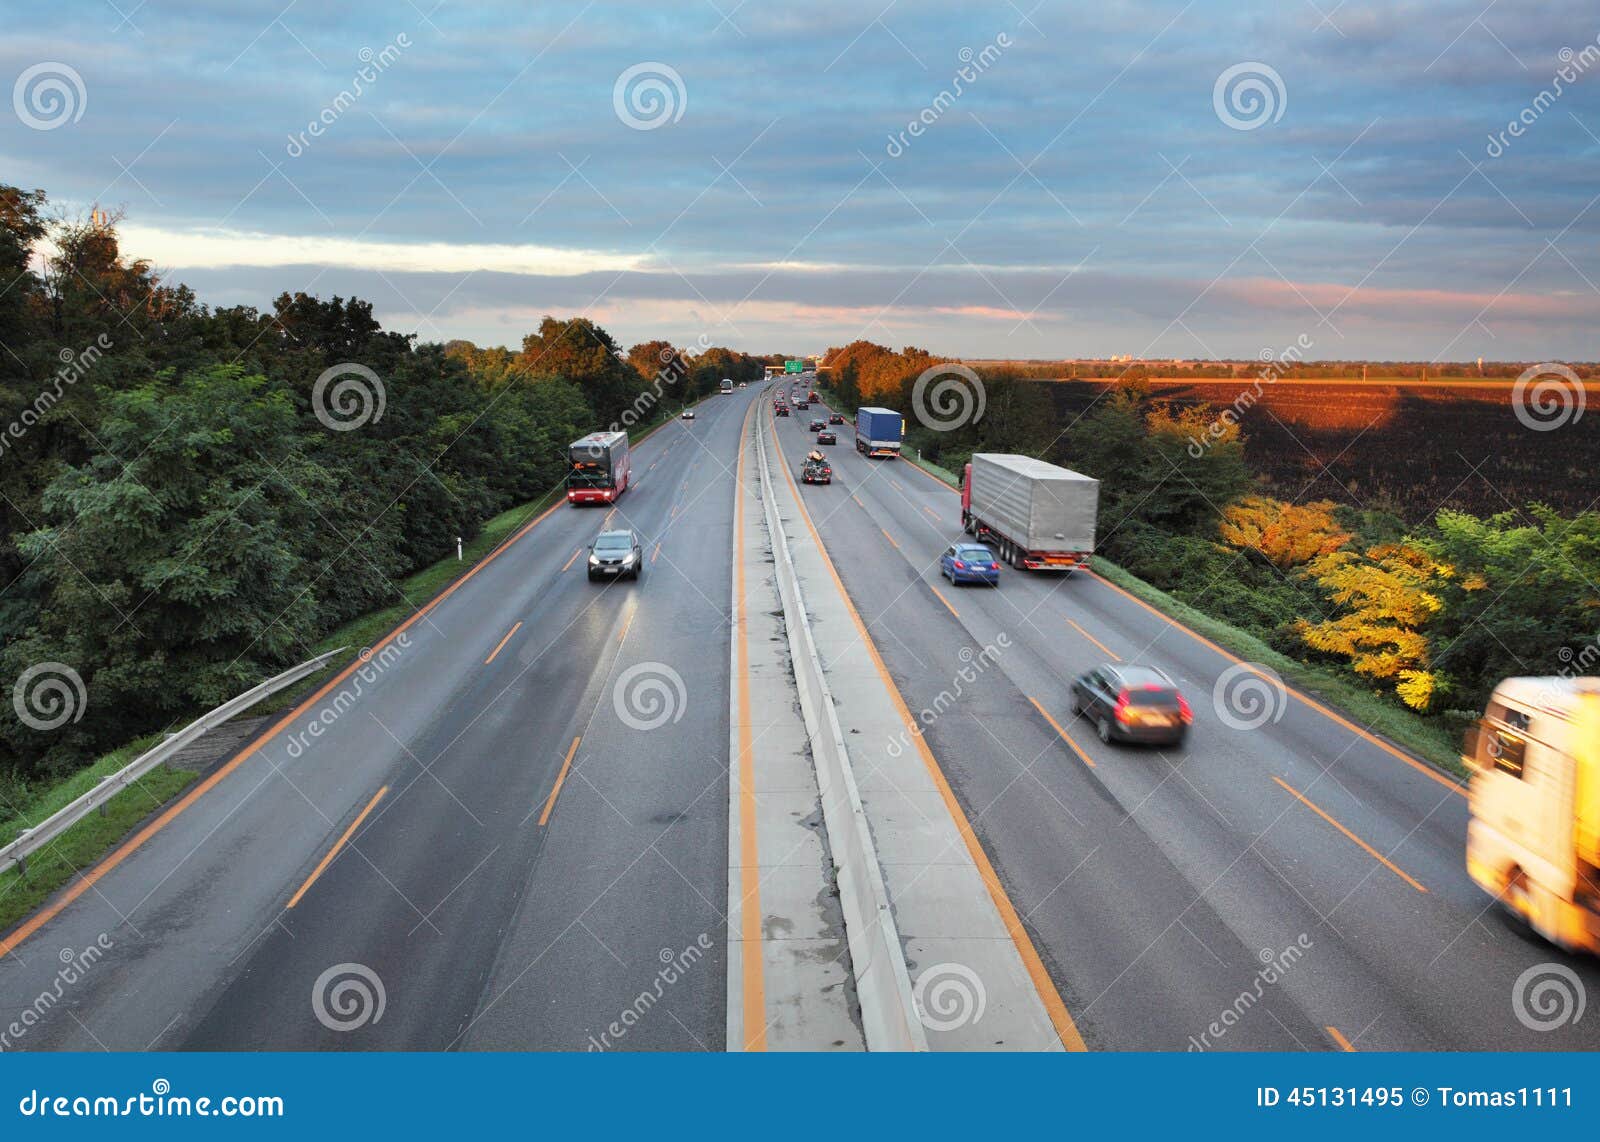 higway road with cars